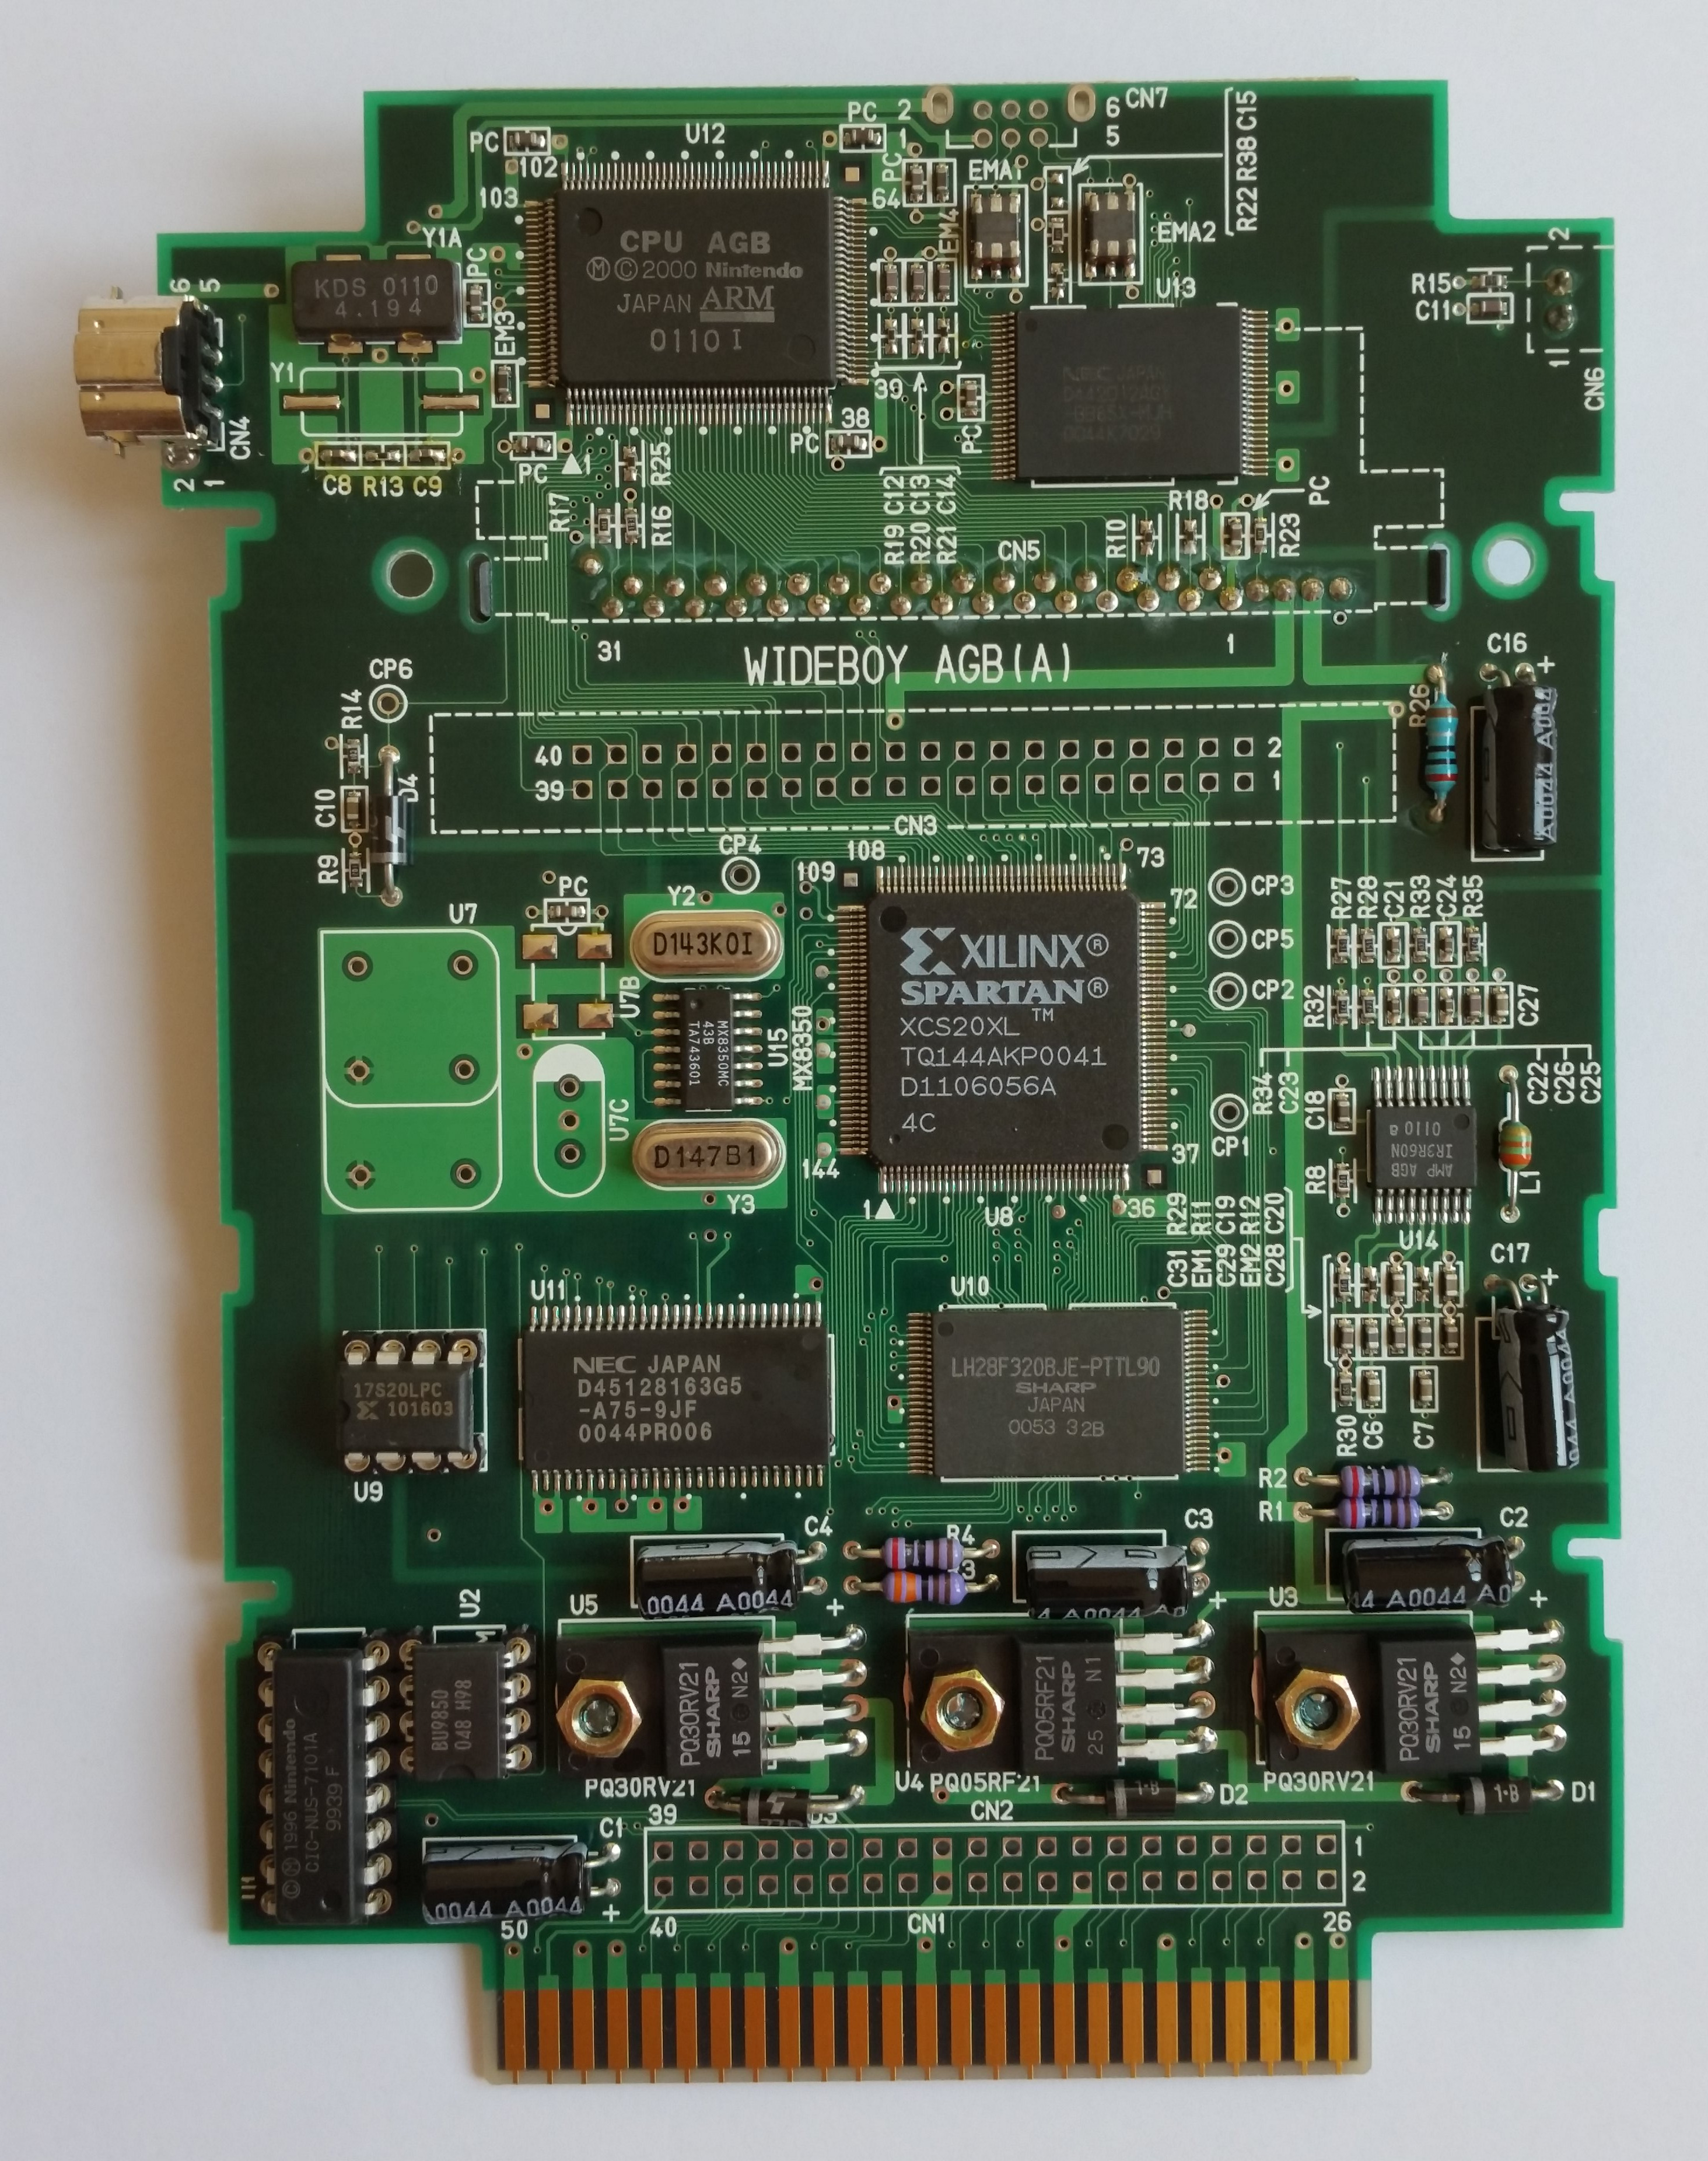 Back side of Wide-Boy64 AGB circuit board